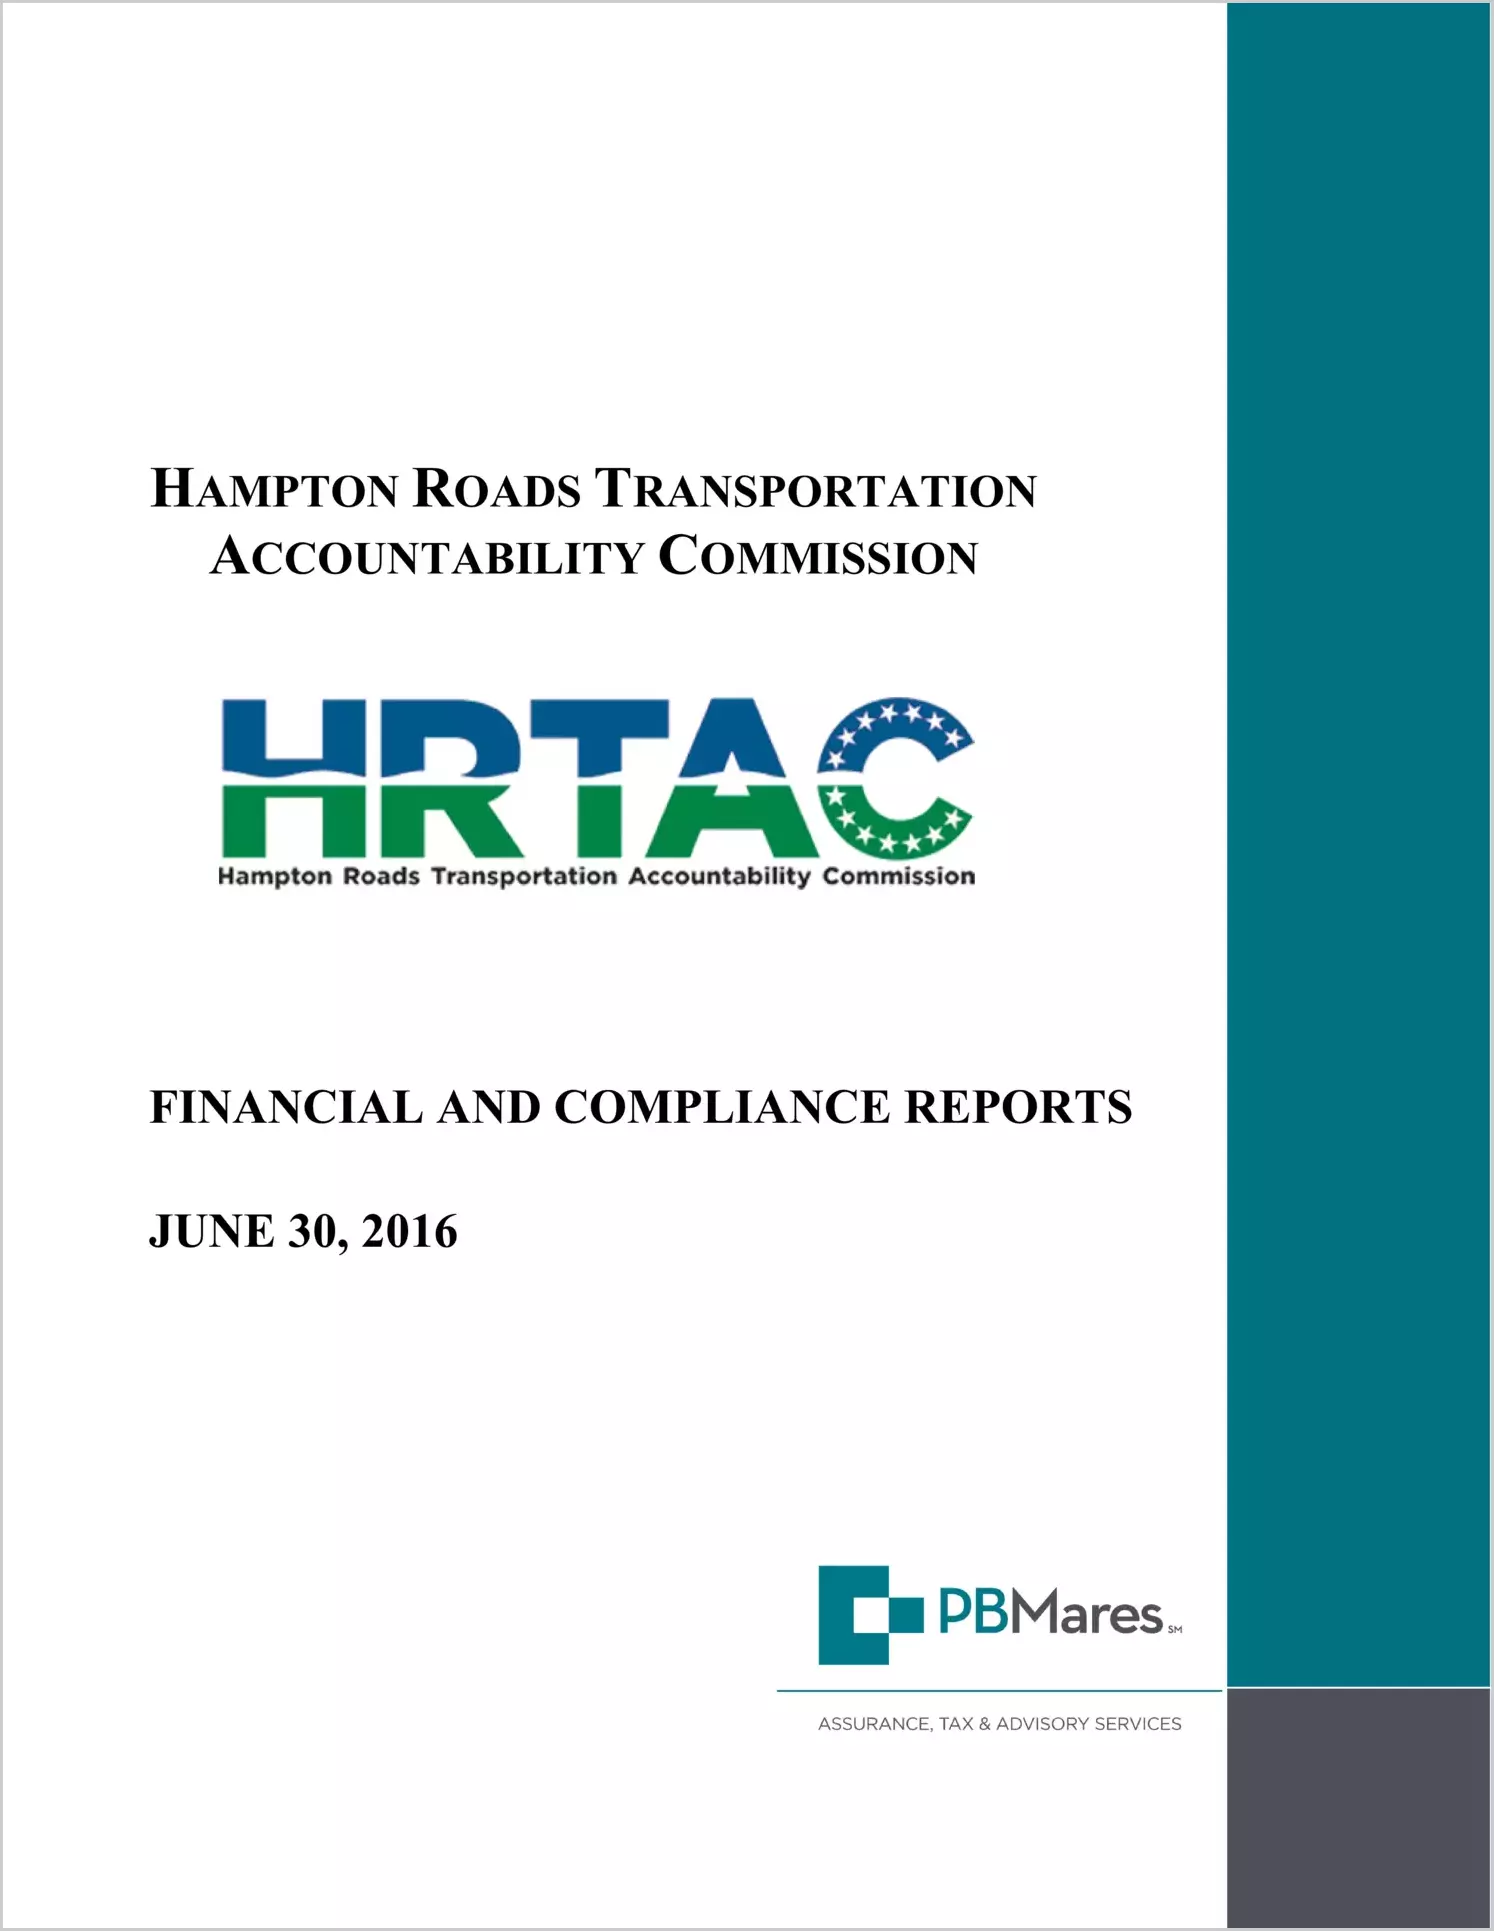 Hampton Roads Transportation Accountability Commission Financial Statement for the fiscal year ended June 30, 2016